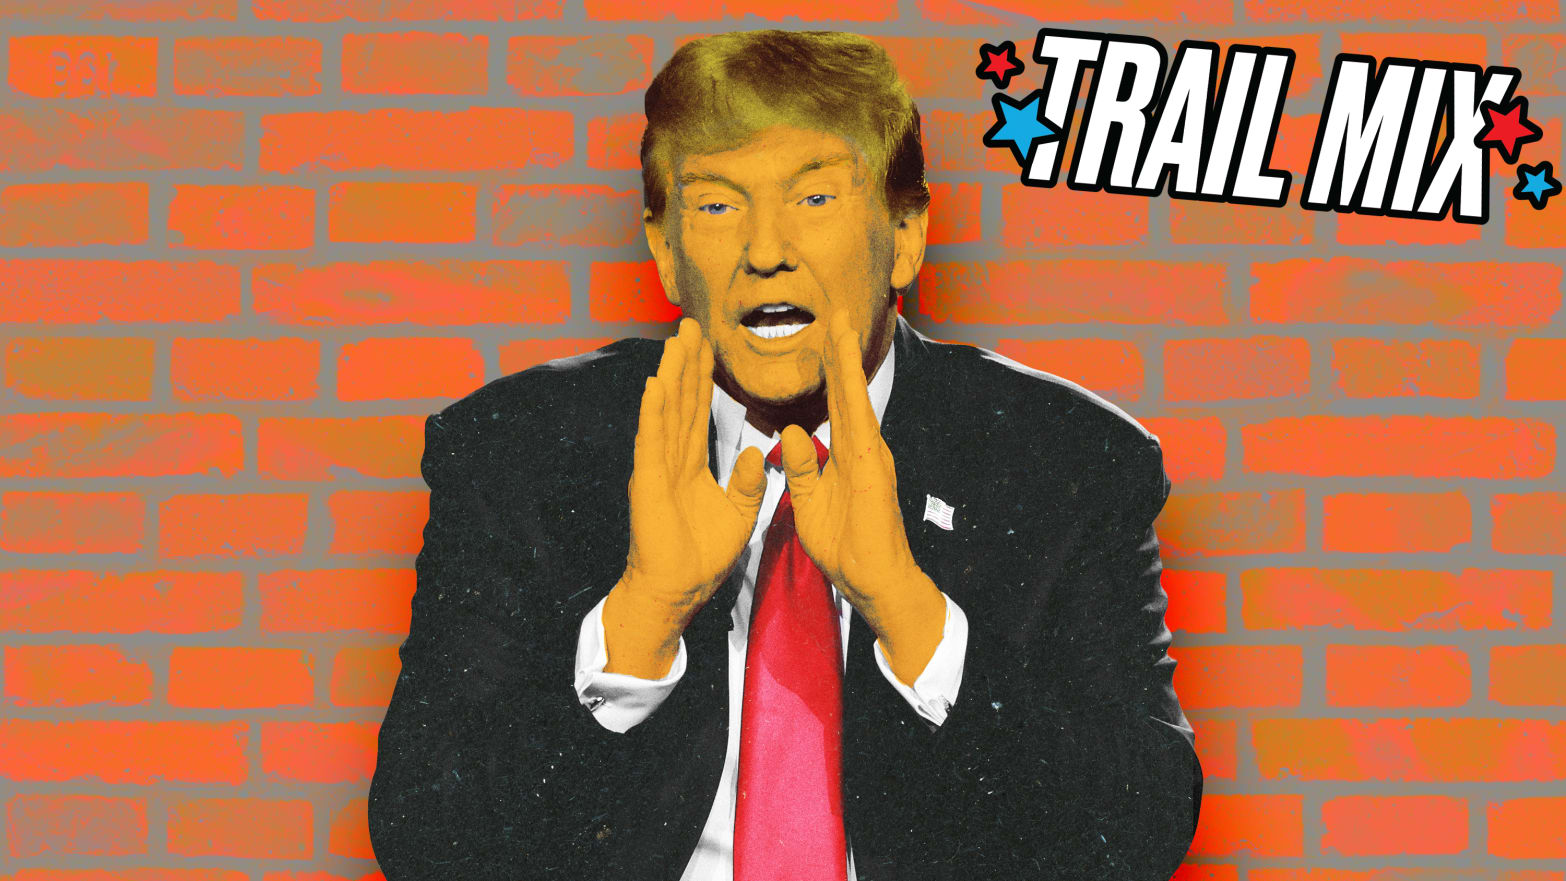 Donald Trump shouting in front of a brick wall